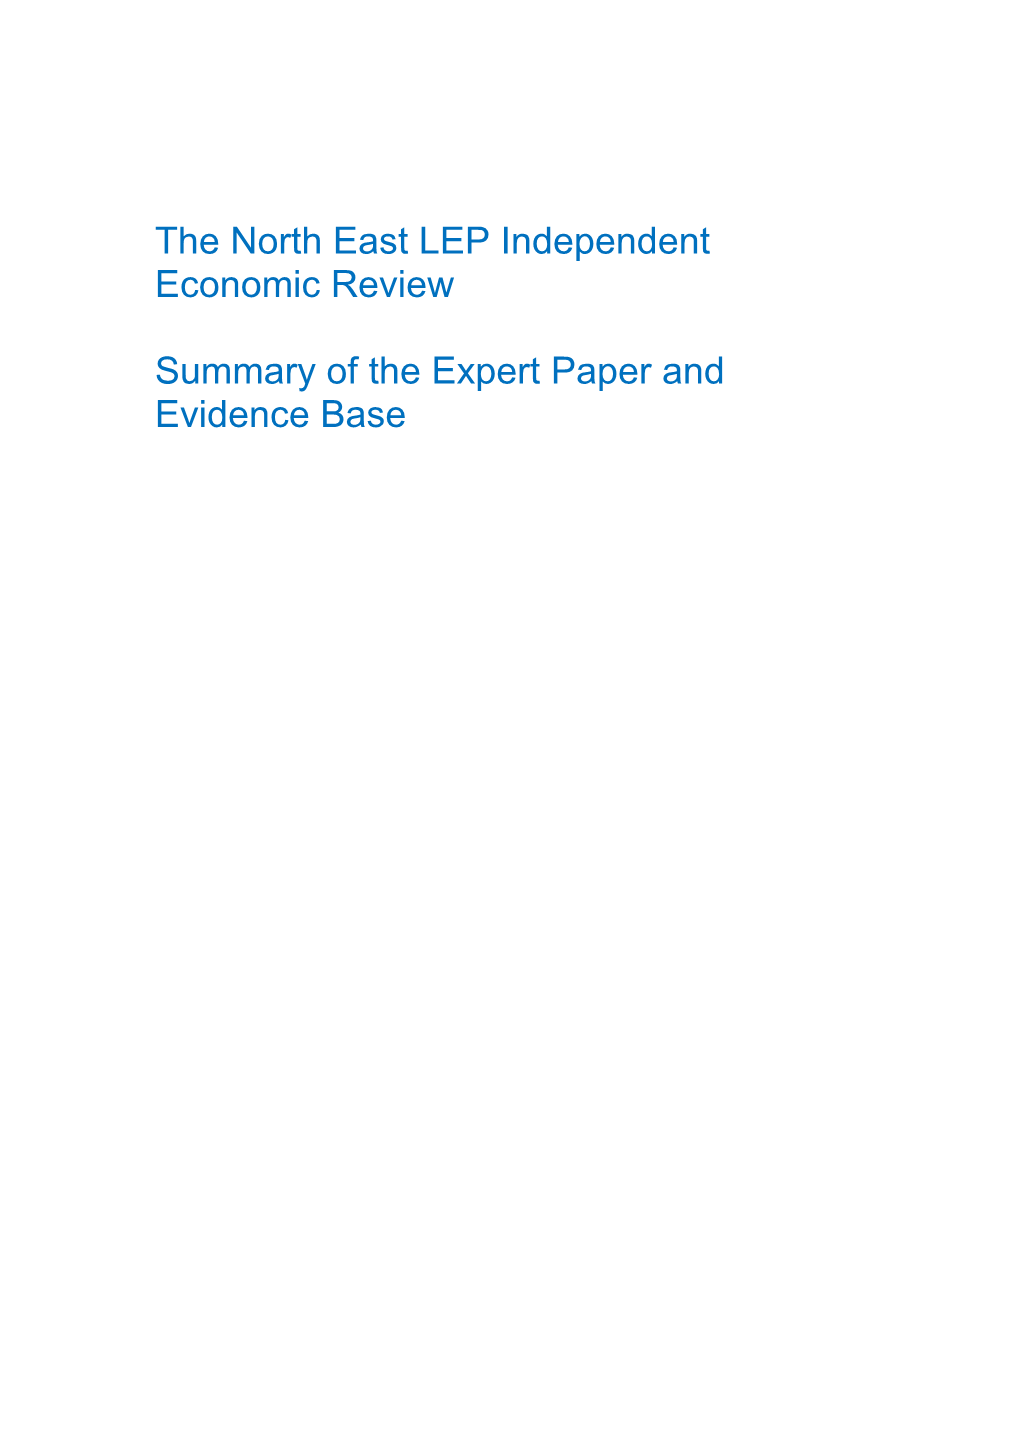 The North East LEP Independent Economic Review Summary of The